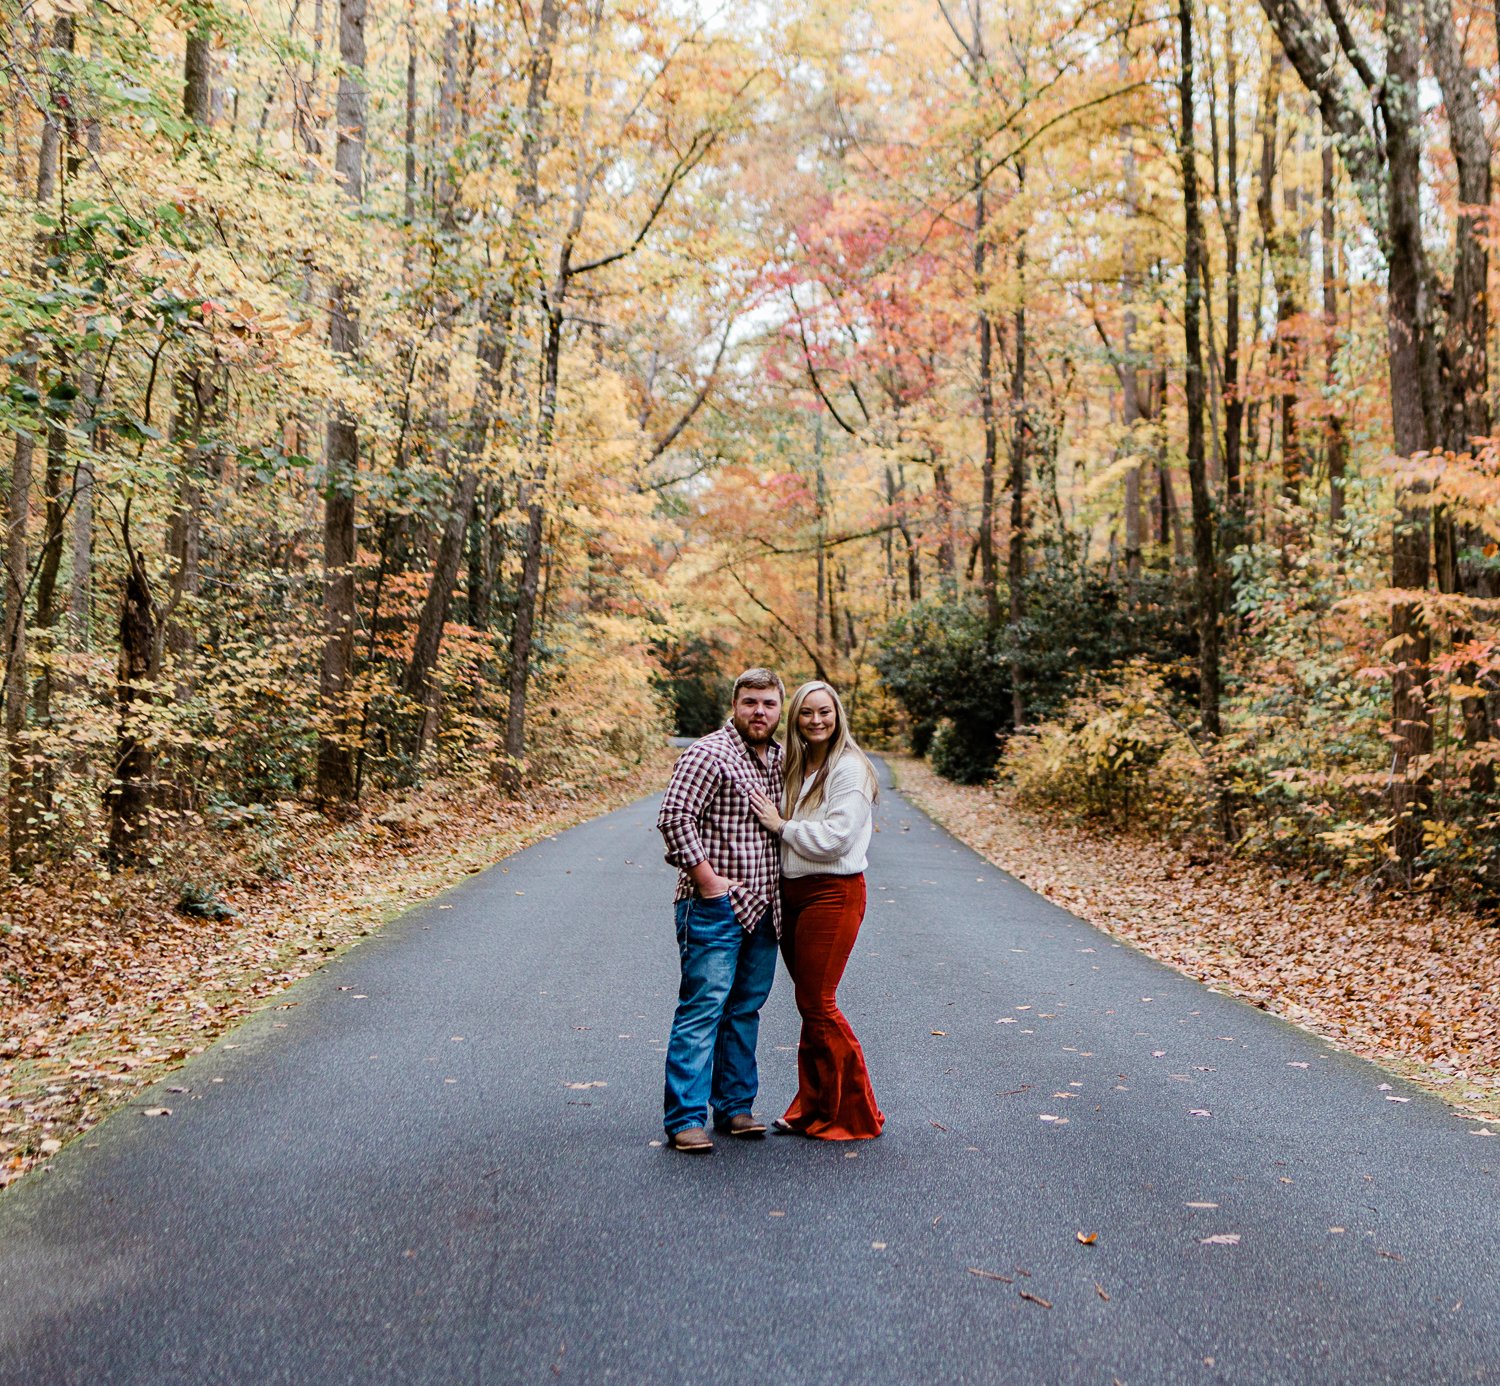 5 of the best places to take engagment photos in greenville sc-13.jpg